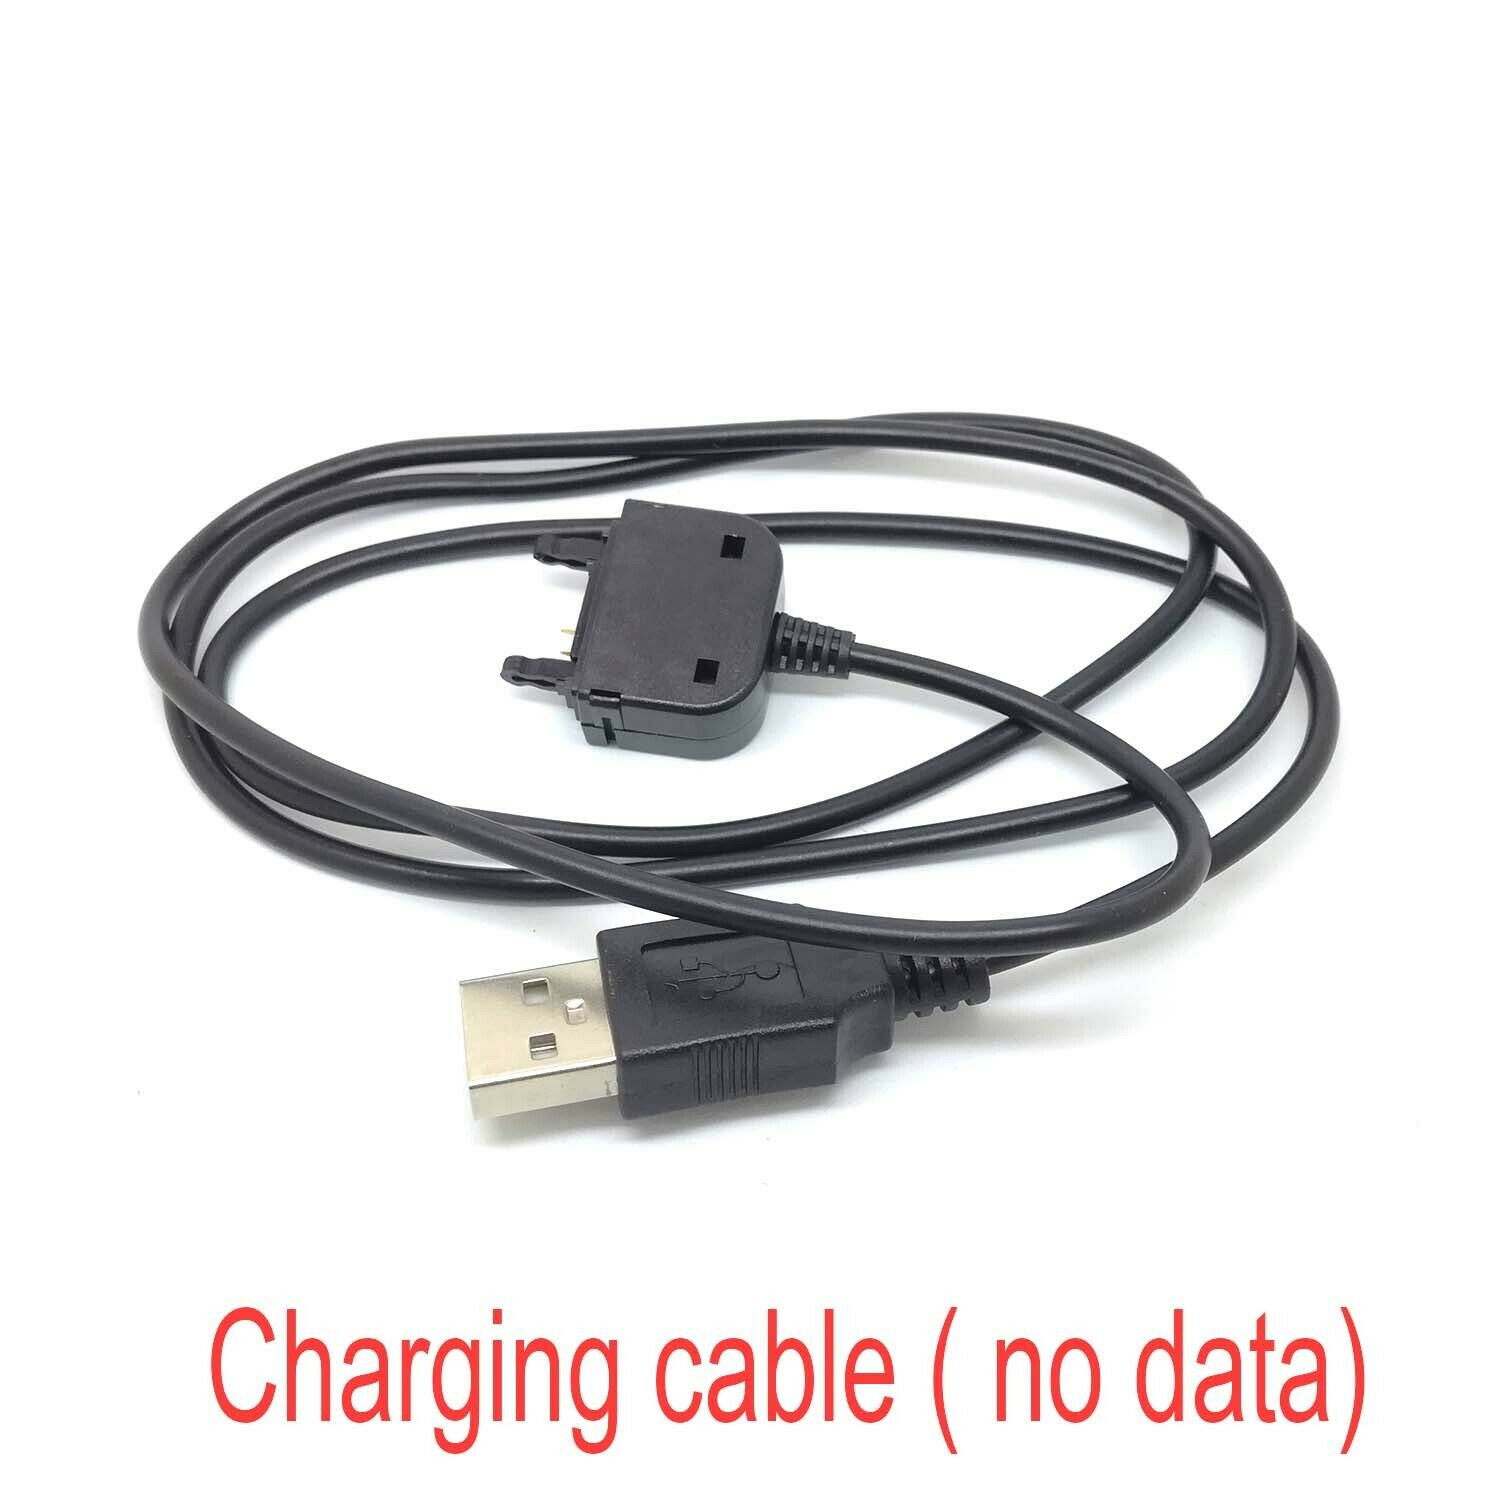 USB Charger CABLE for Sony Ericsson W810 W810i W830 W830i W850 W850i W880 Z310 Z310i Z320 Z320i Z520 Z520i Z525